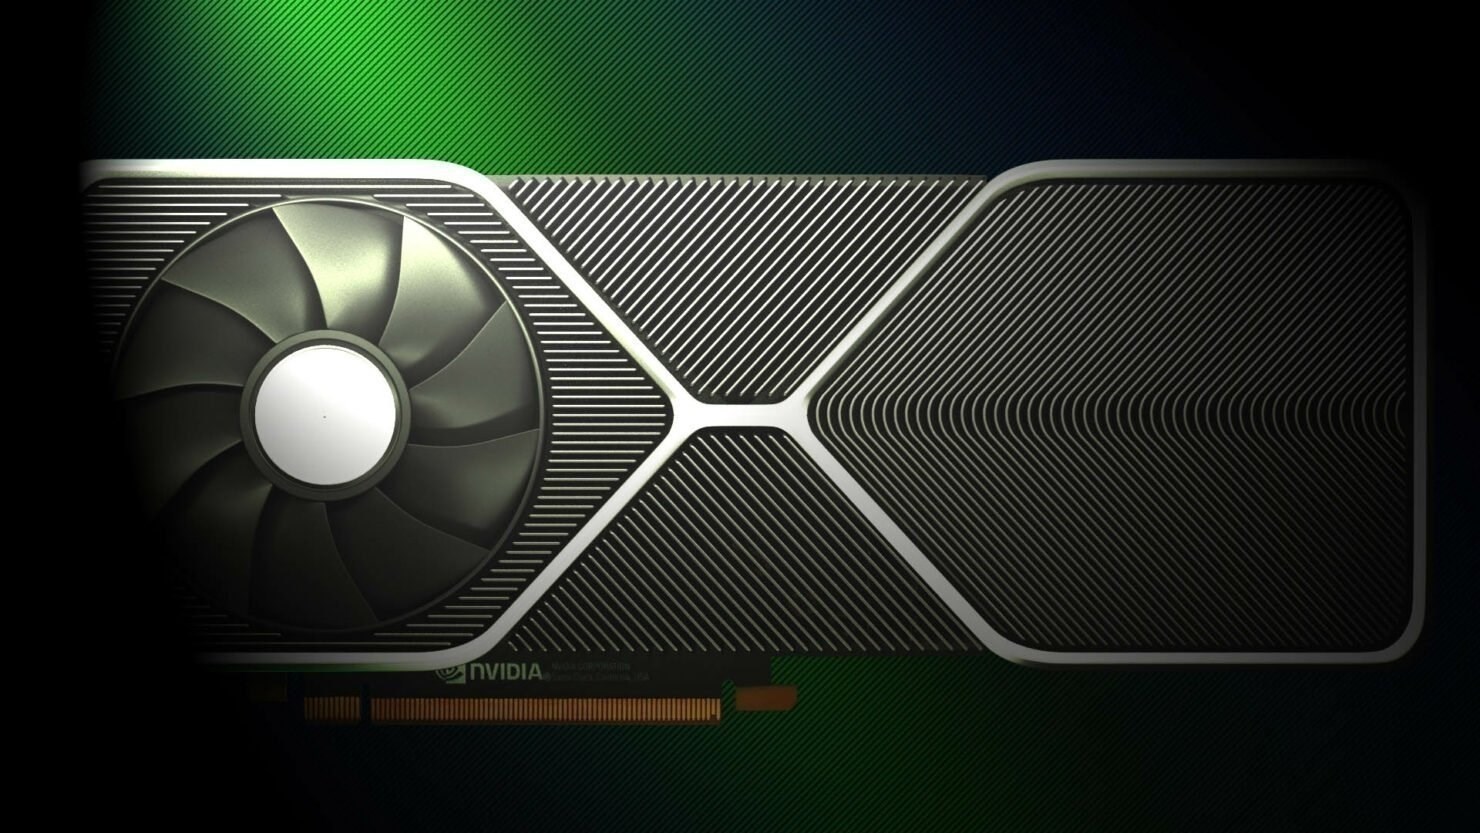 NVIDIA Partners To Offer Miniscule Price Cuts on GeForce GTX 16